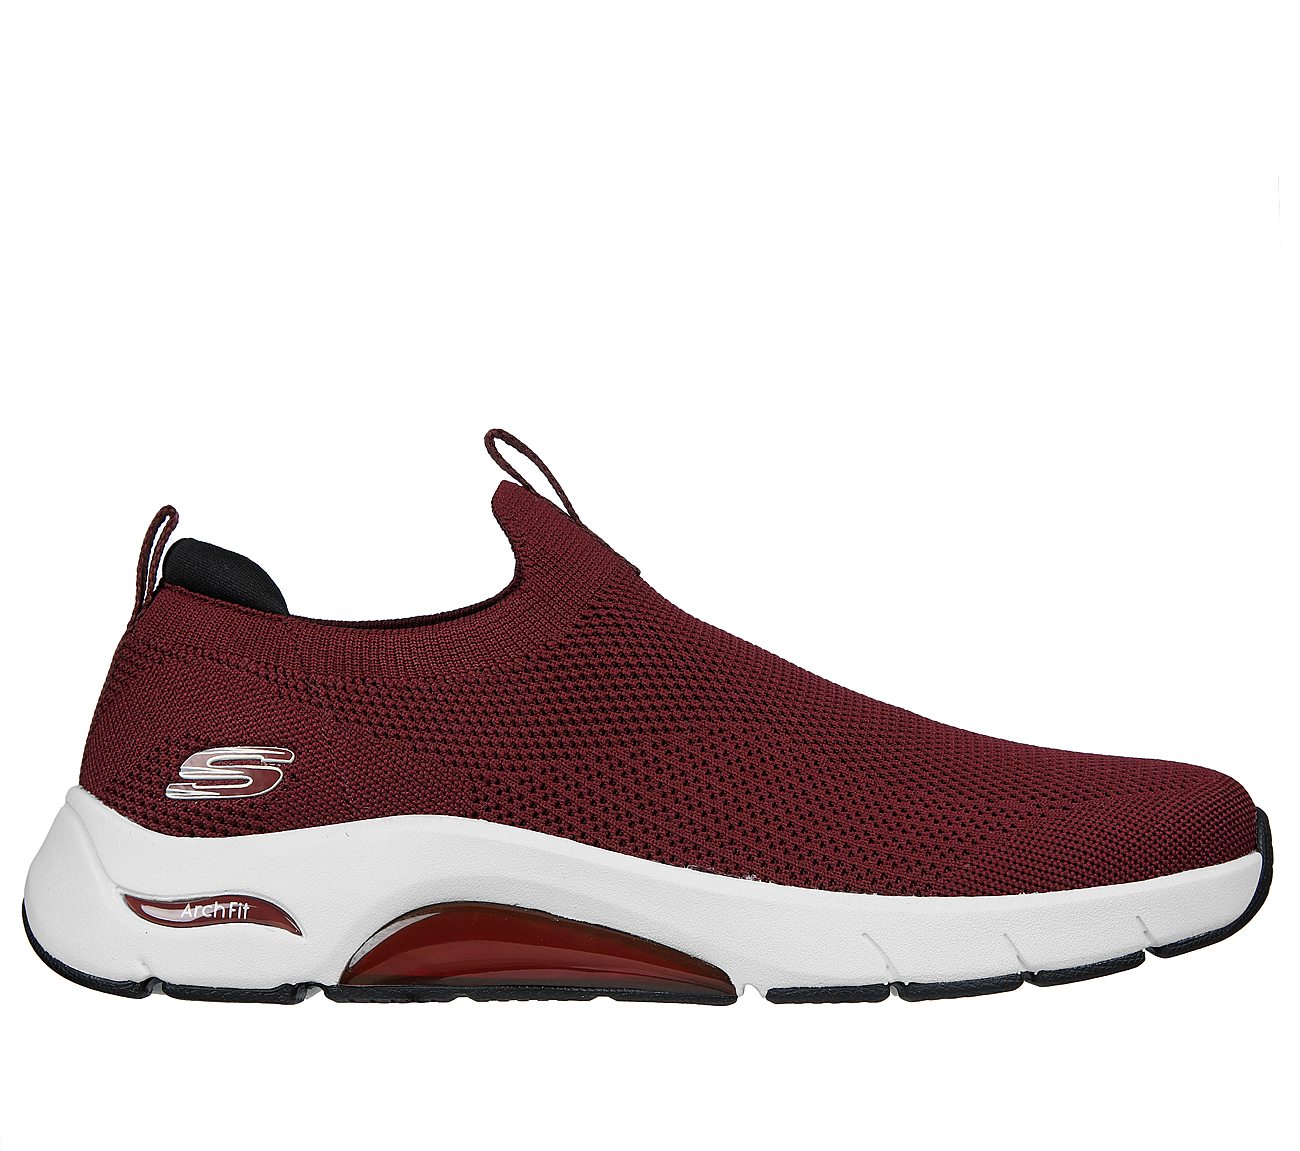 SKECH-AIR ARCH FIT, BBURGUNDY Footwear Lateral View